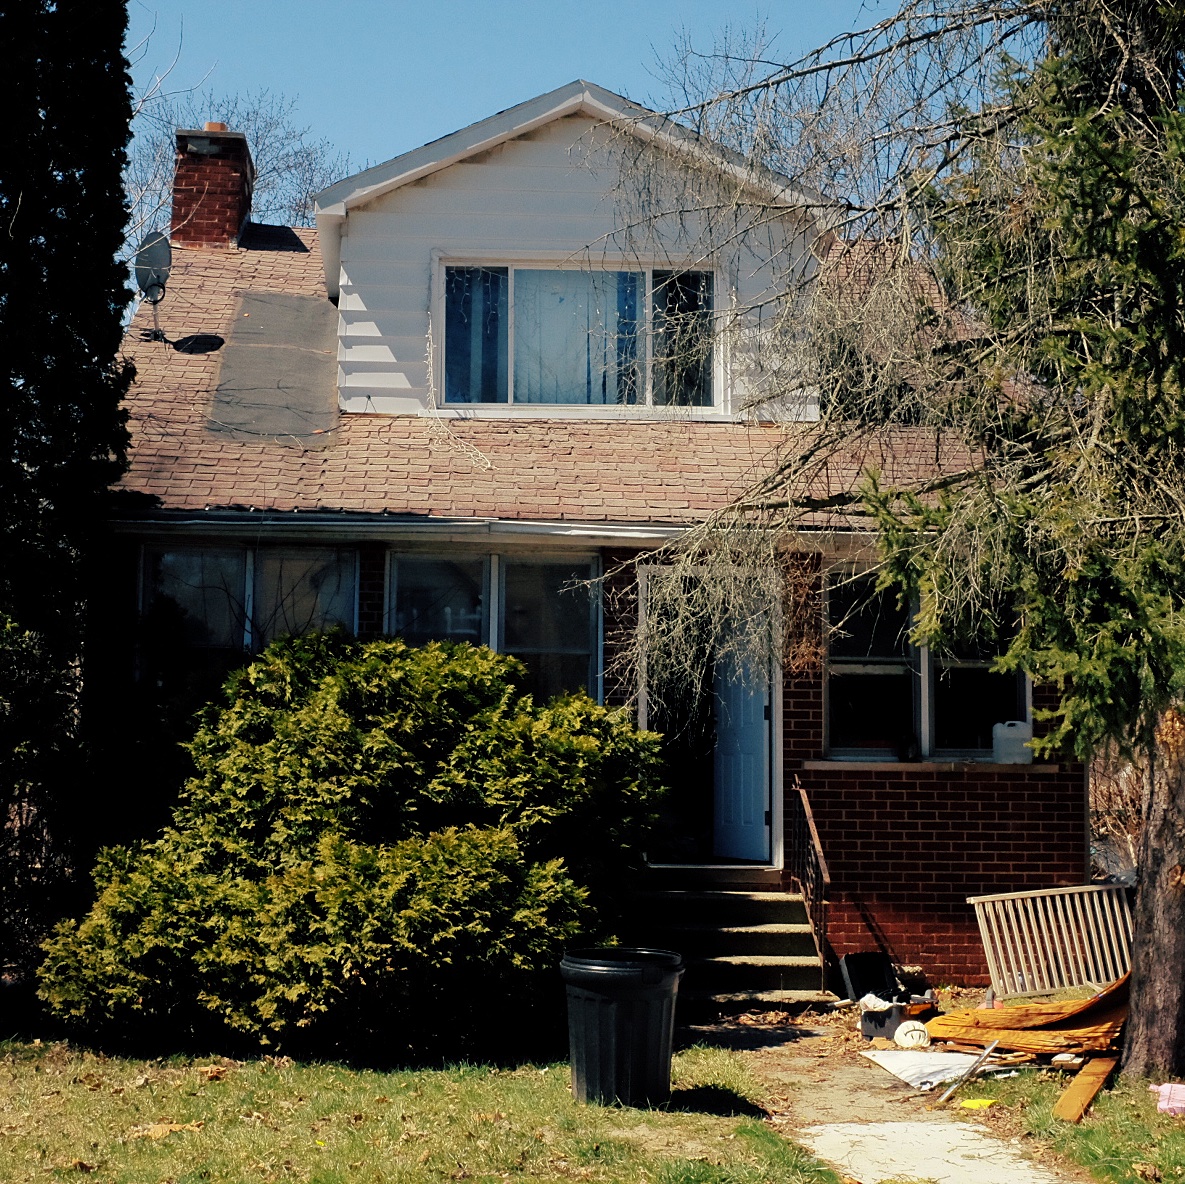 Photograph of a brick bungalo from the front. There's a bush on the left. The front door is open. There is a trash pile on the right at the base of a tree.